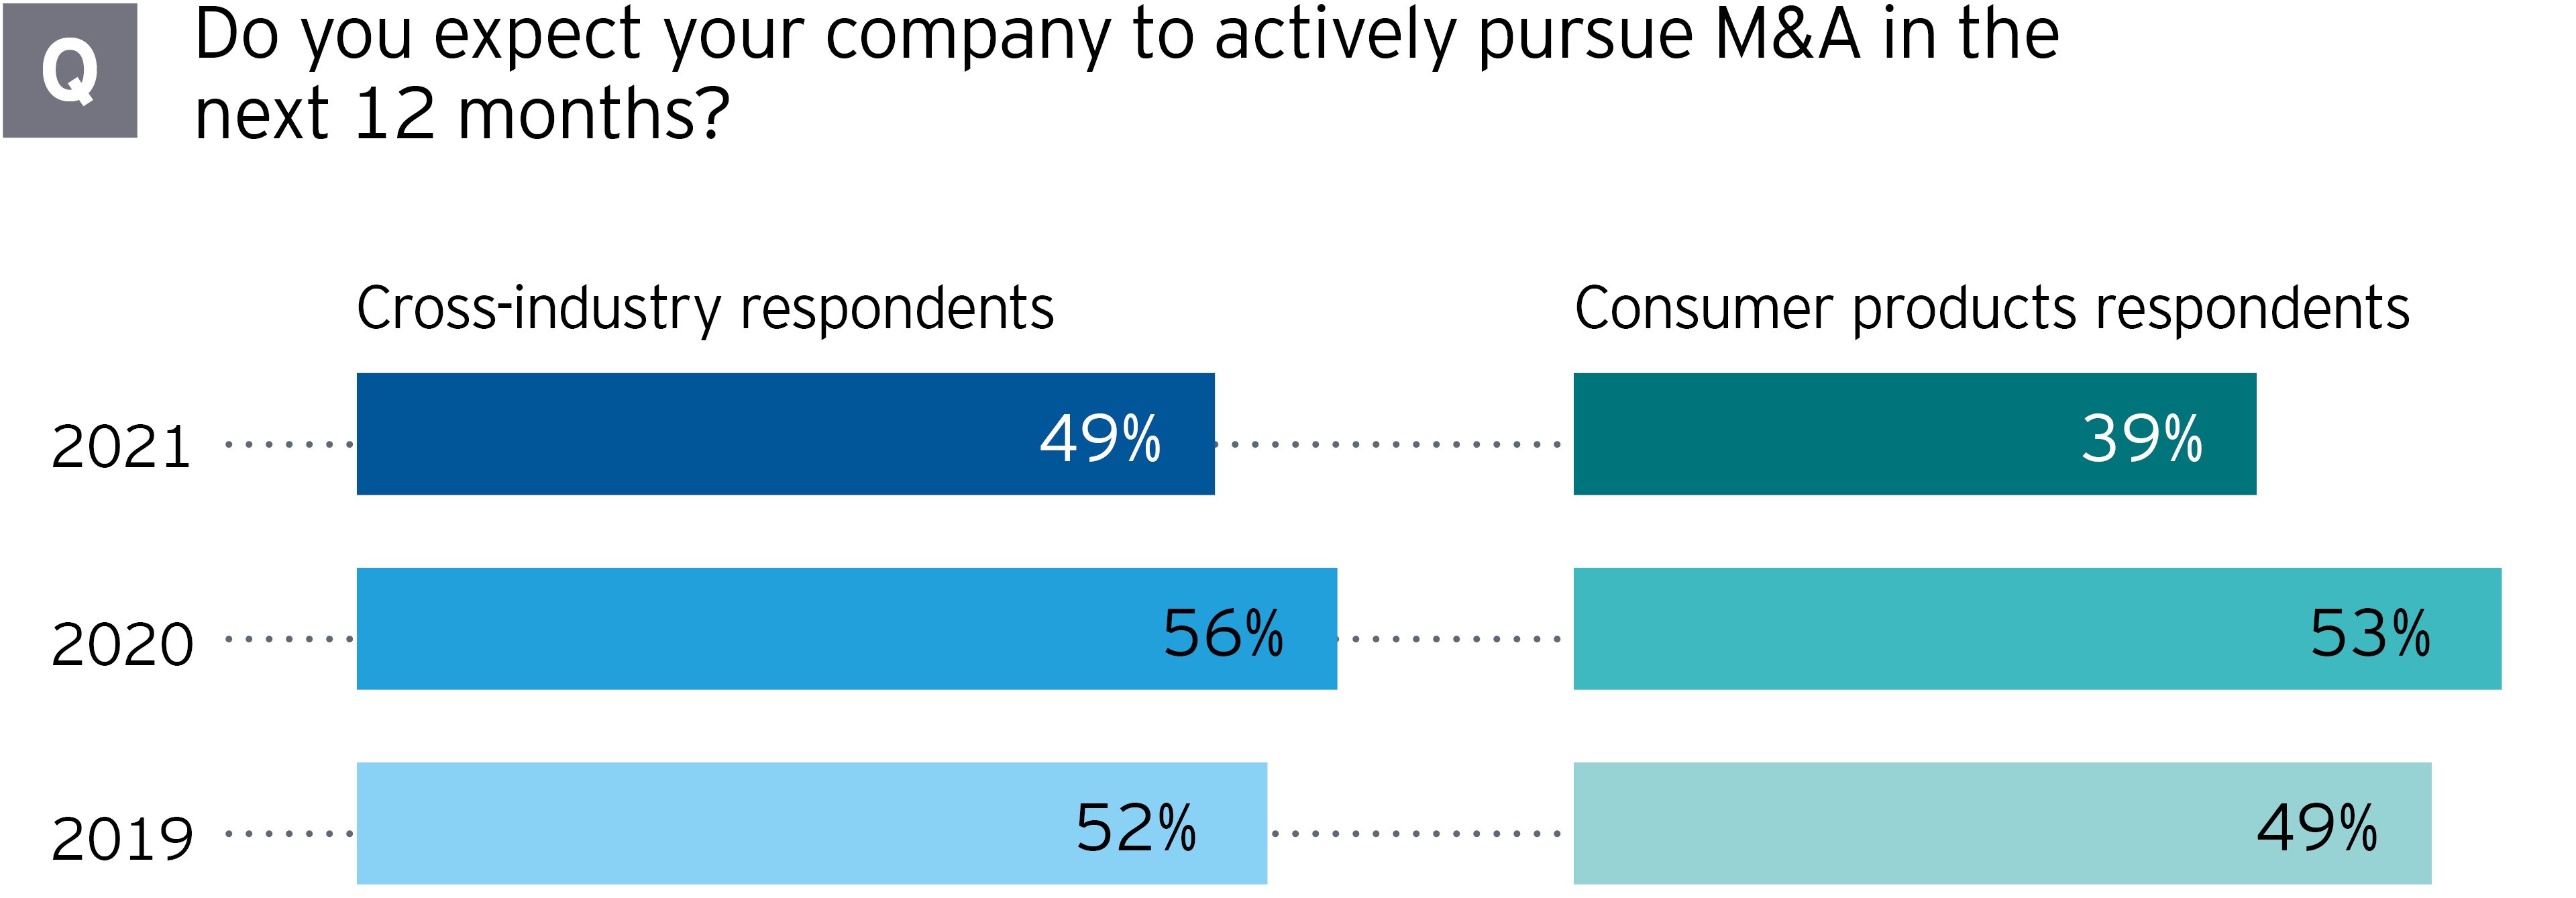 M&A expectations for consumer product companies